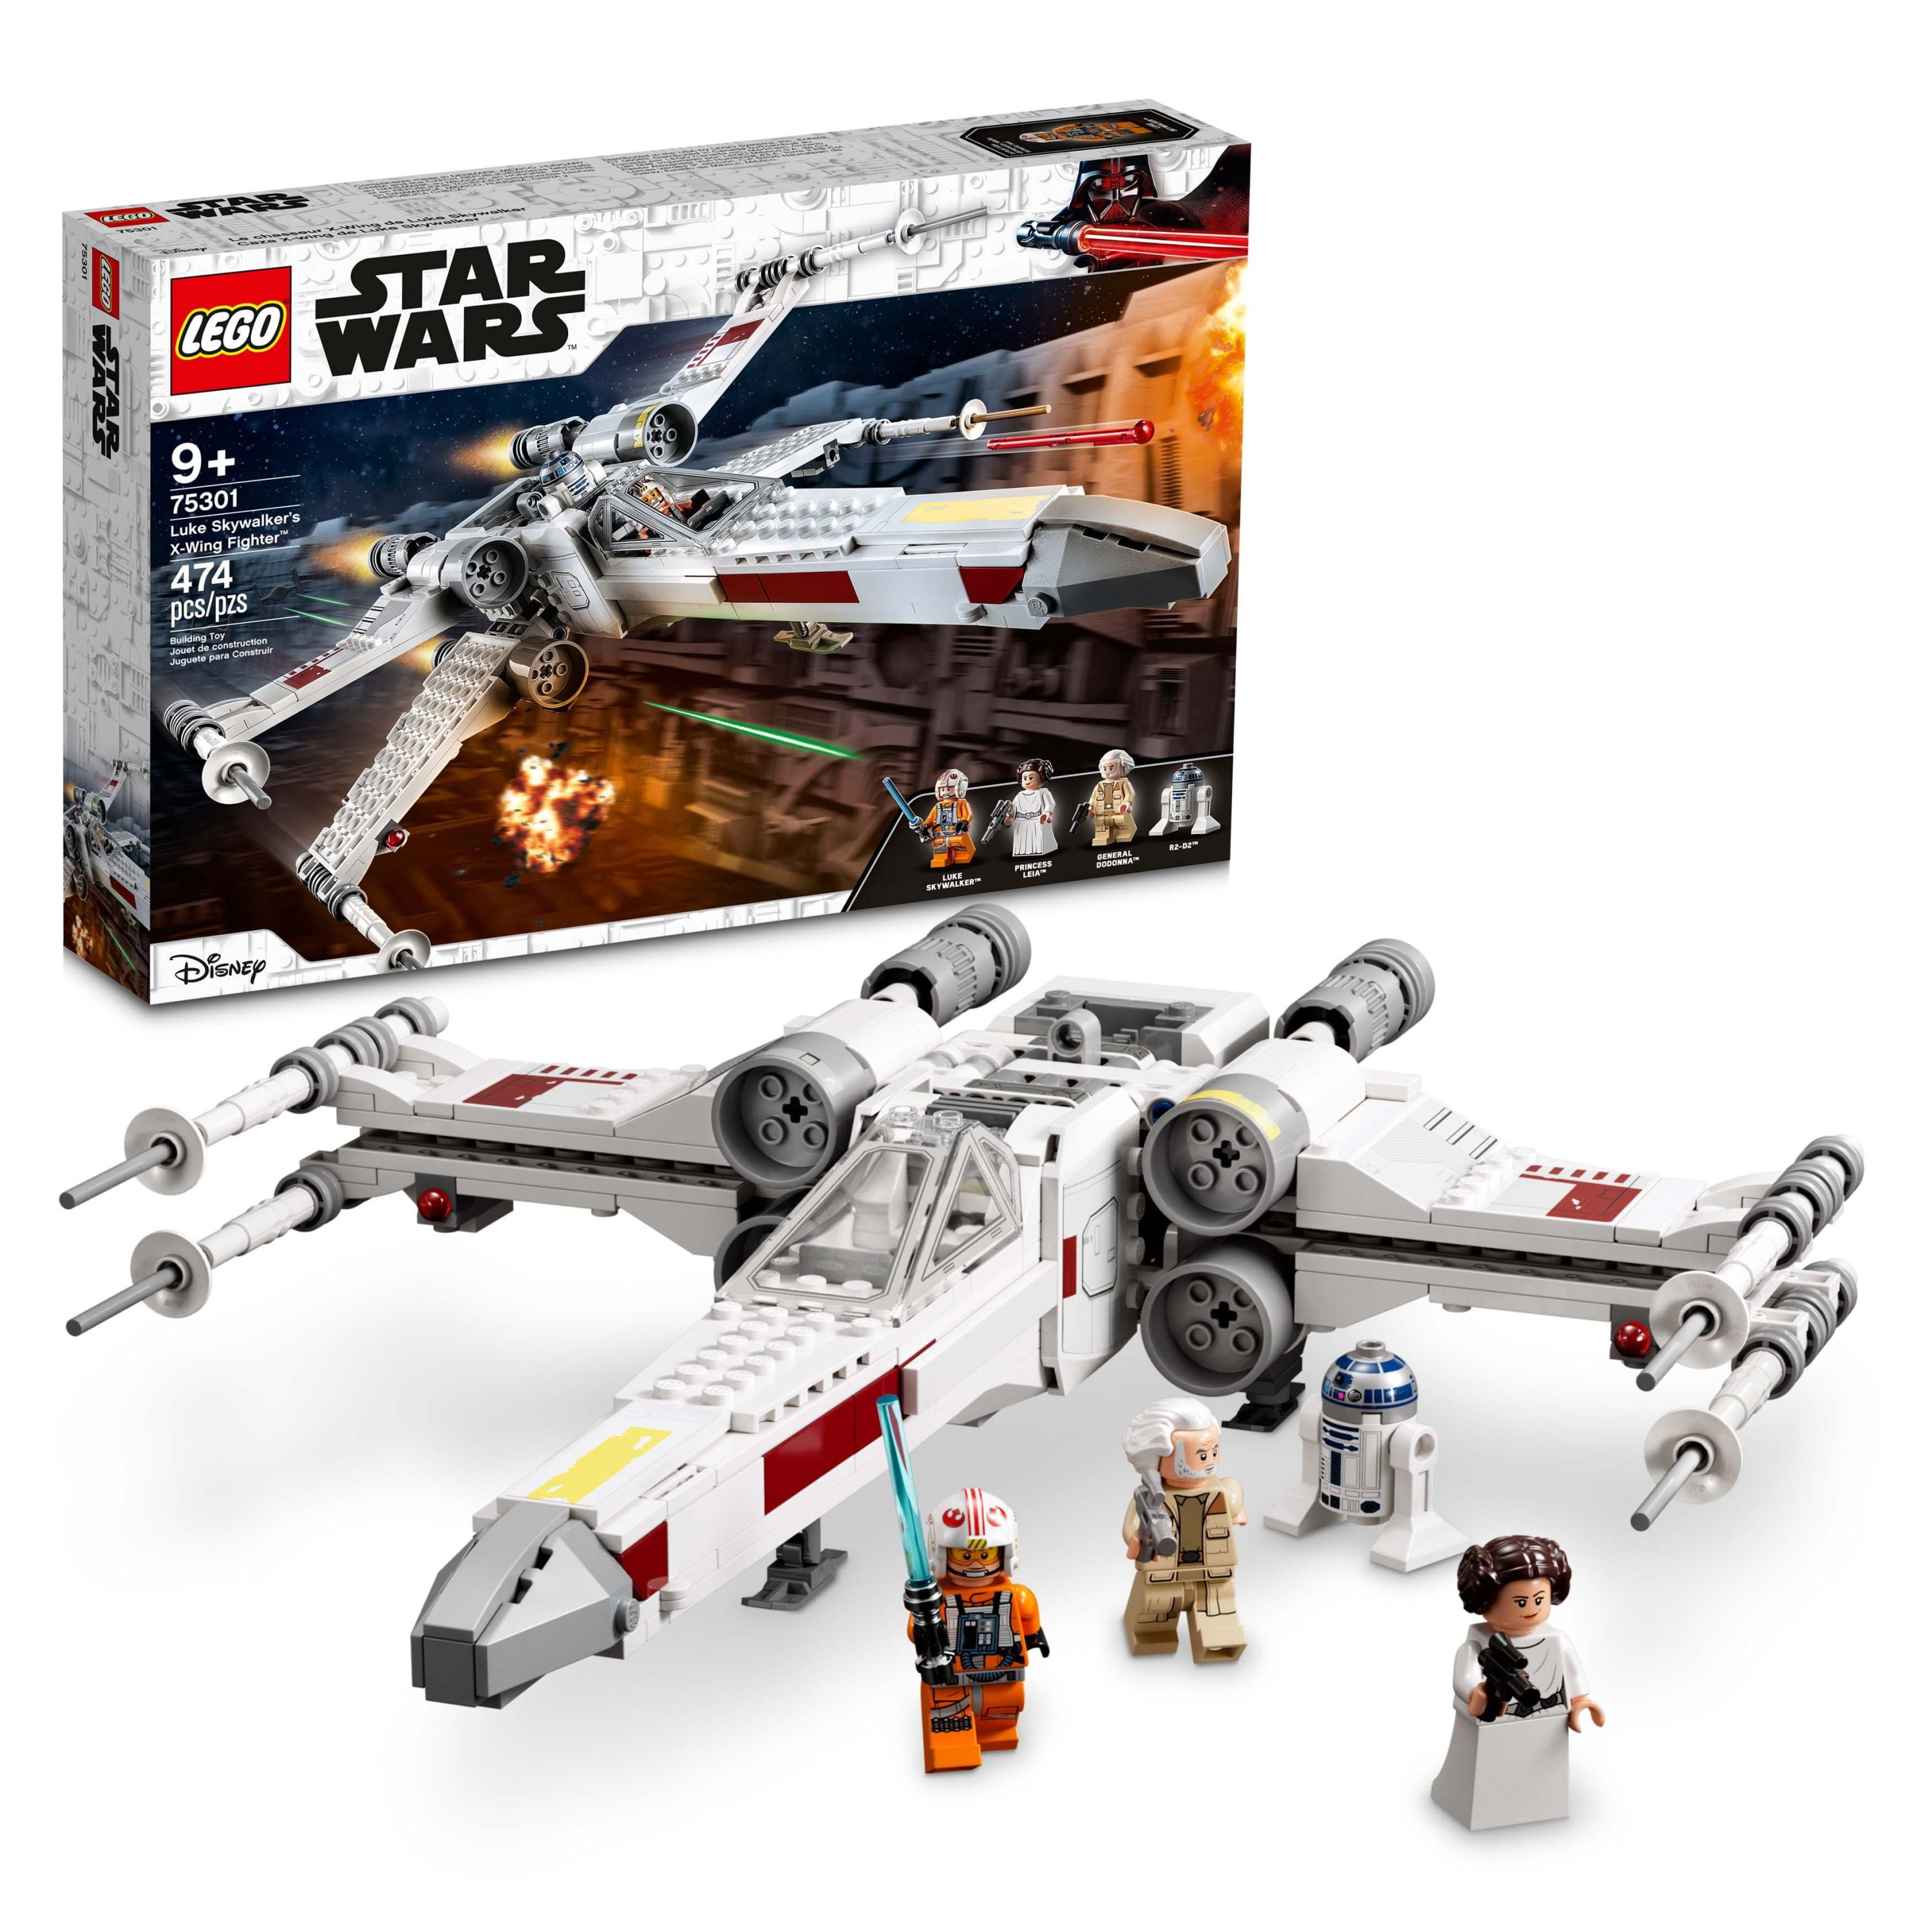 LEGO Star Wars Luke Skywalker's X-Wing Fighter 75301 Building Toy, Gifts for Kids, Boys & Girls with Princess Leia Minifigure and R2-D2 Droid Figure Walmart.com